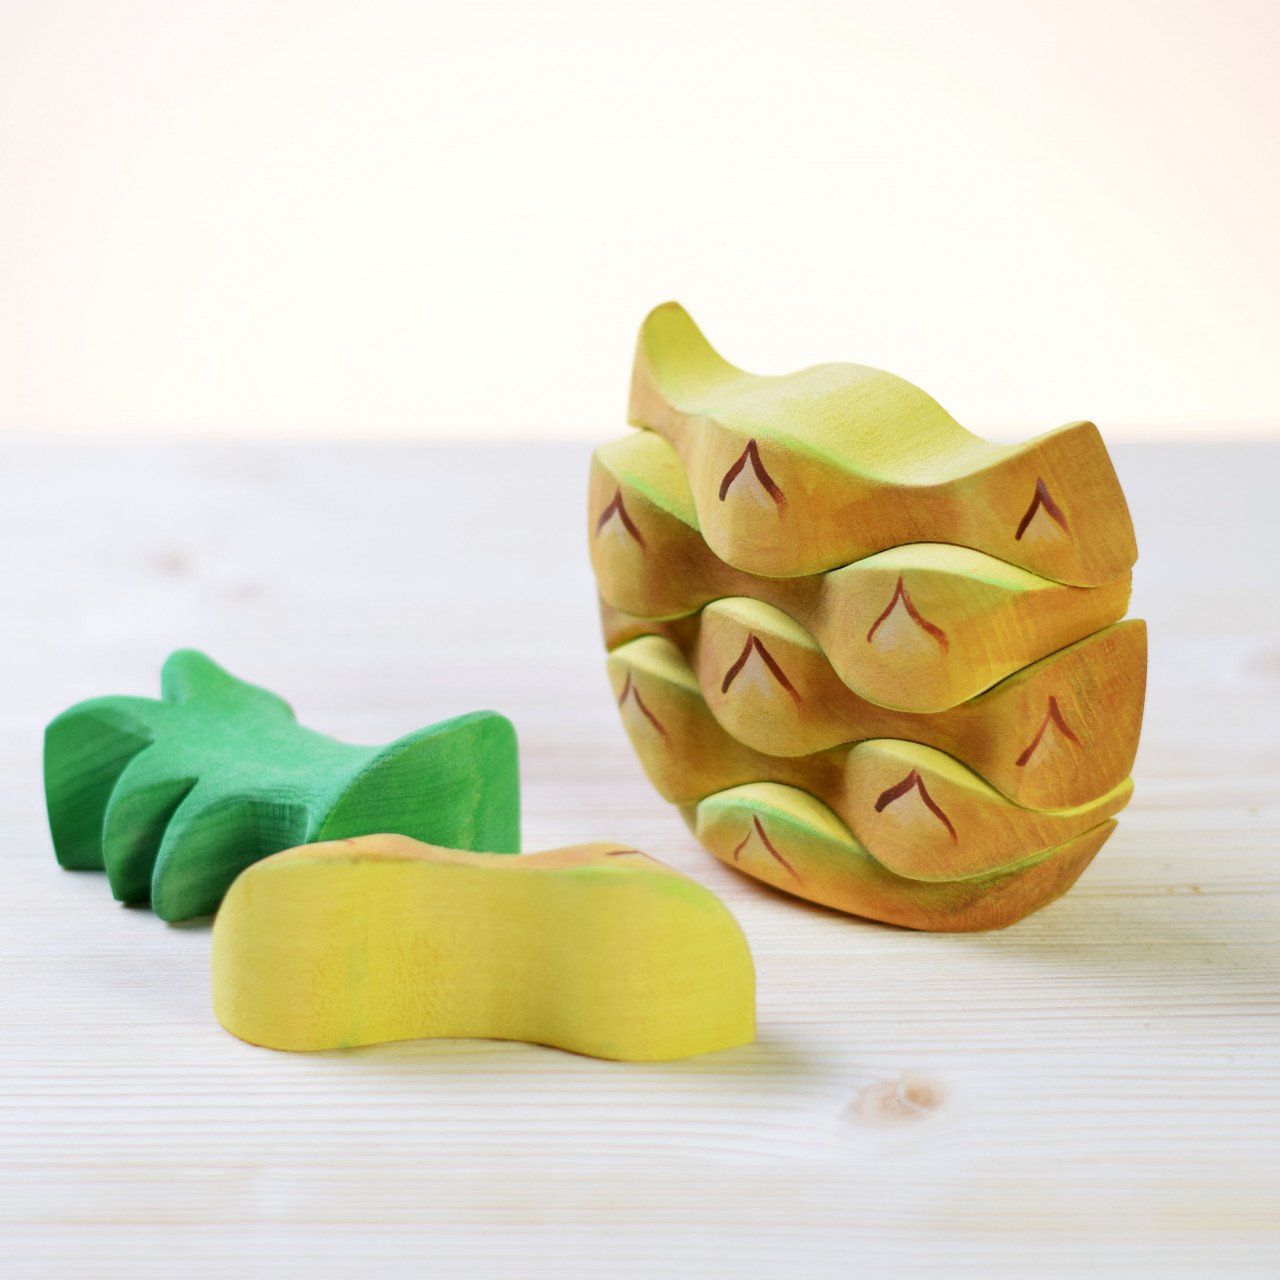 Sustainable Wood Toys: Kooky Collectible Pecanpals Made from Rubber Trees